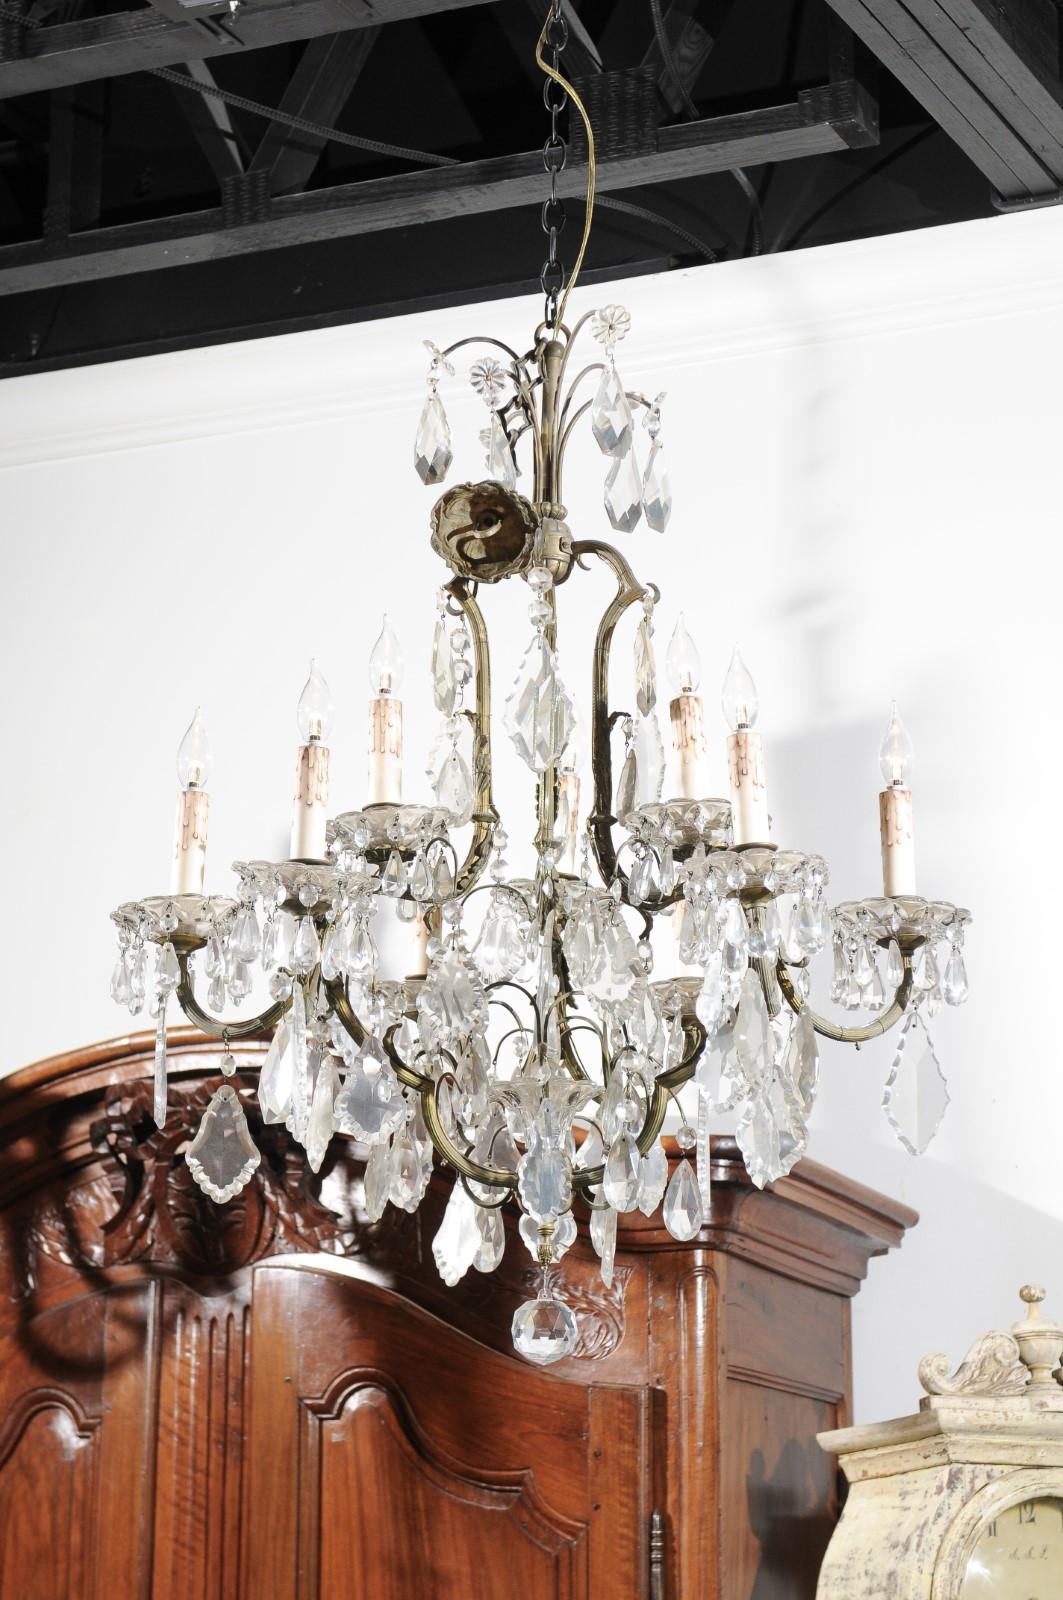 French Eight-Light Crystal Chandelier with Iron Armature from the 19th Century For Sale 8